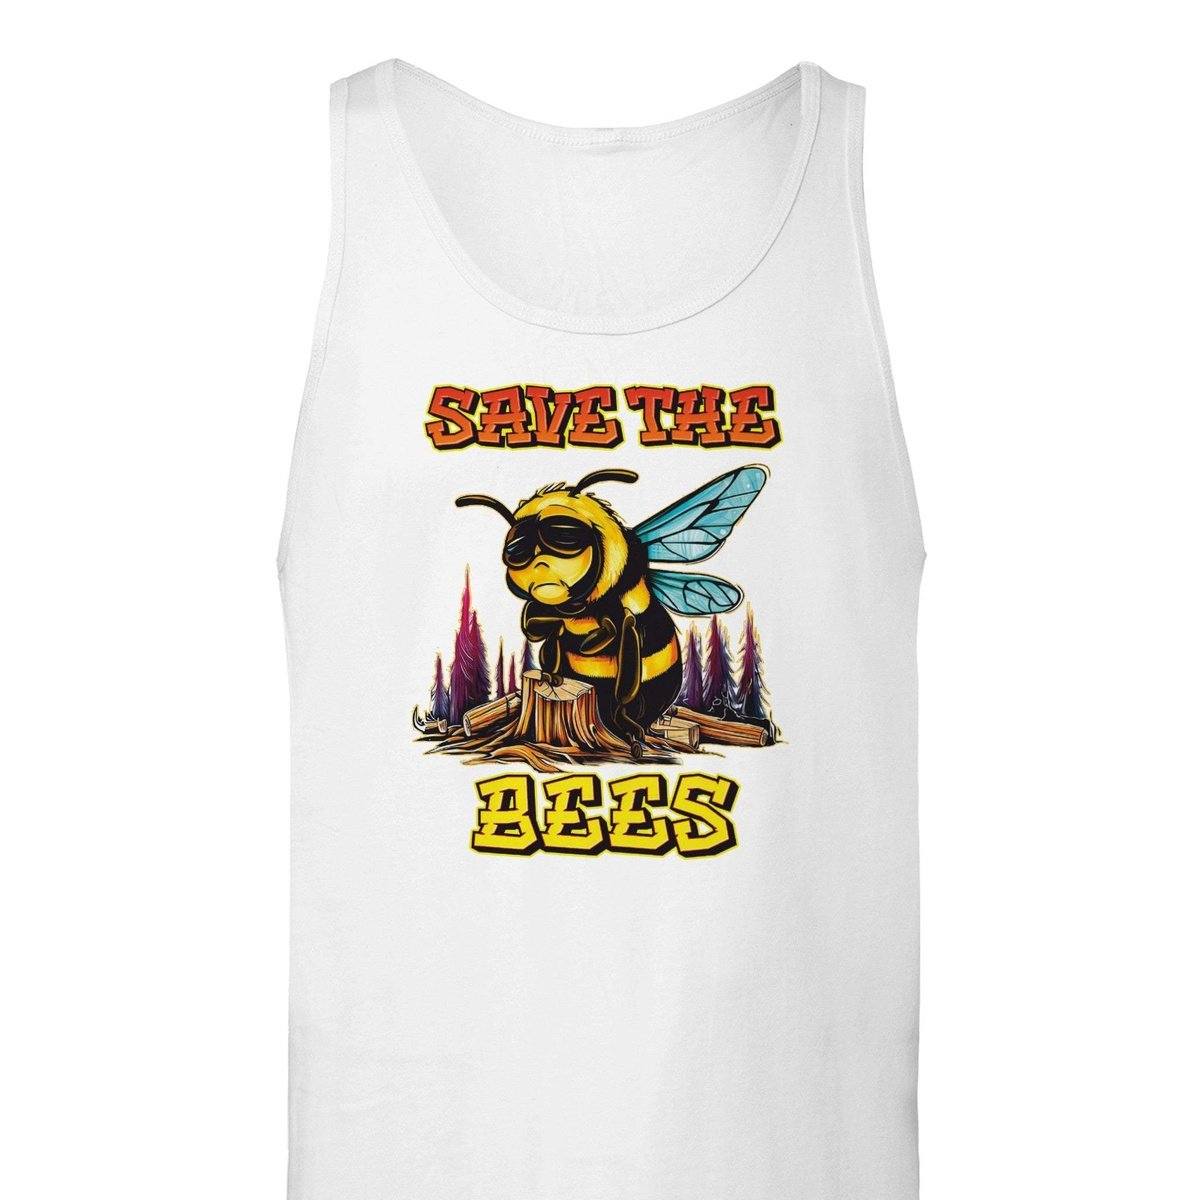 Save The Bees Tank Top - Crying Bee - Premium Unisex Tank Top Australia Online Color